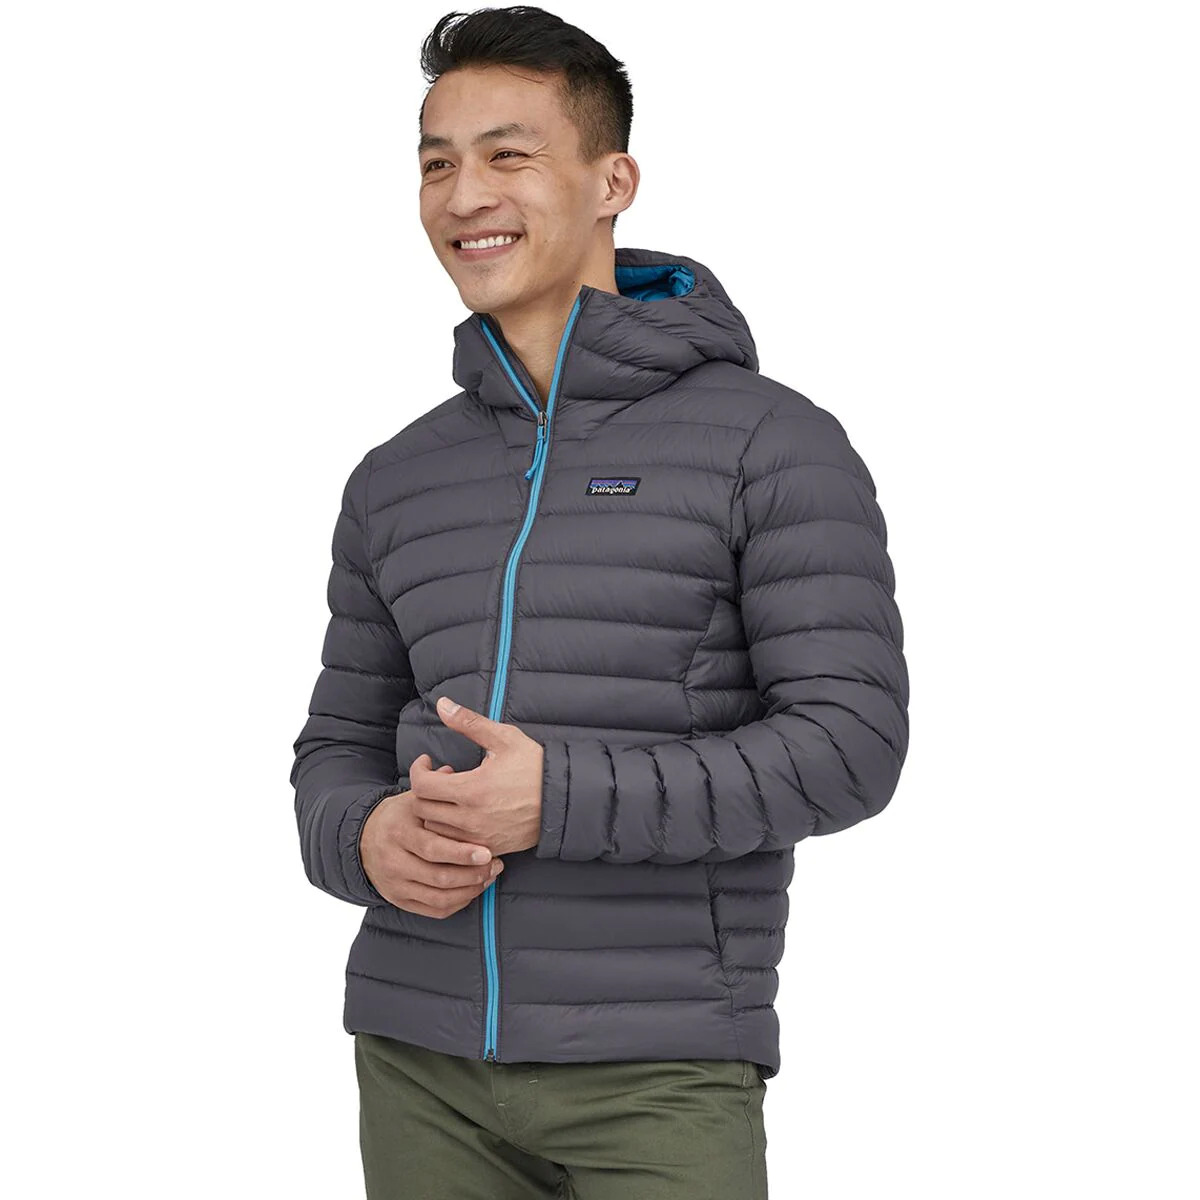 Patagonia Down Sweater Hooded Jacket $197 at Backcountry